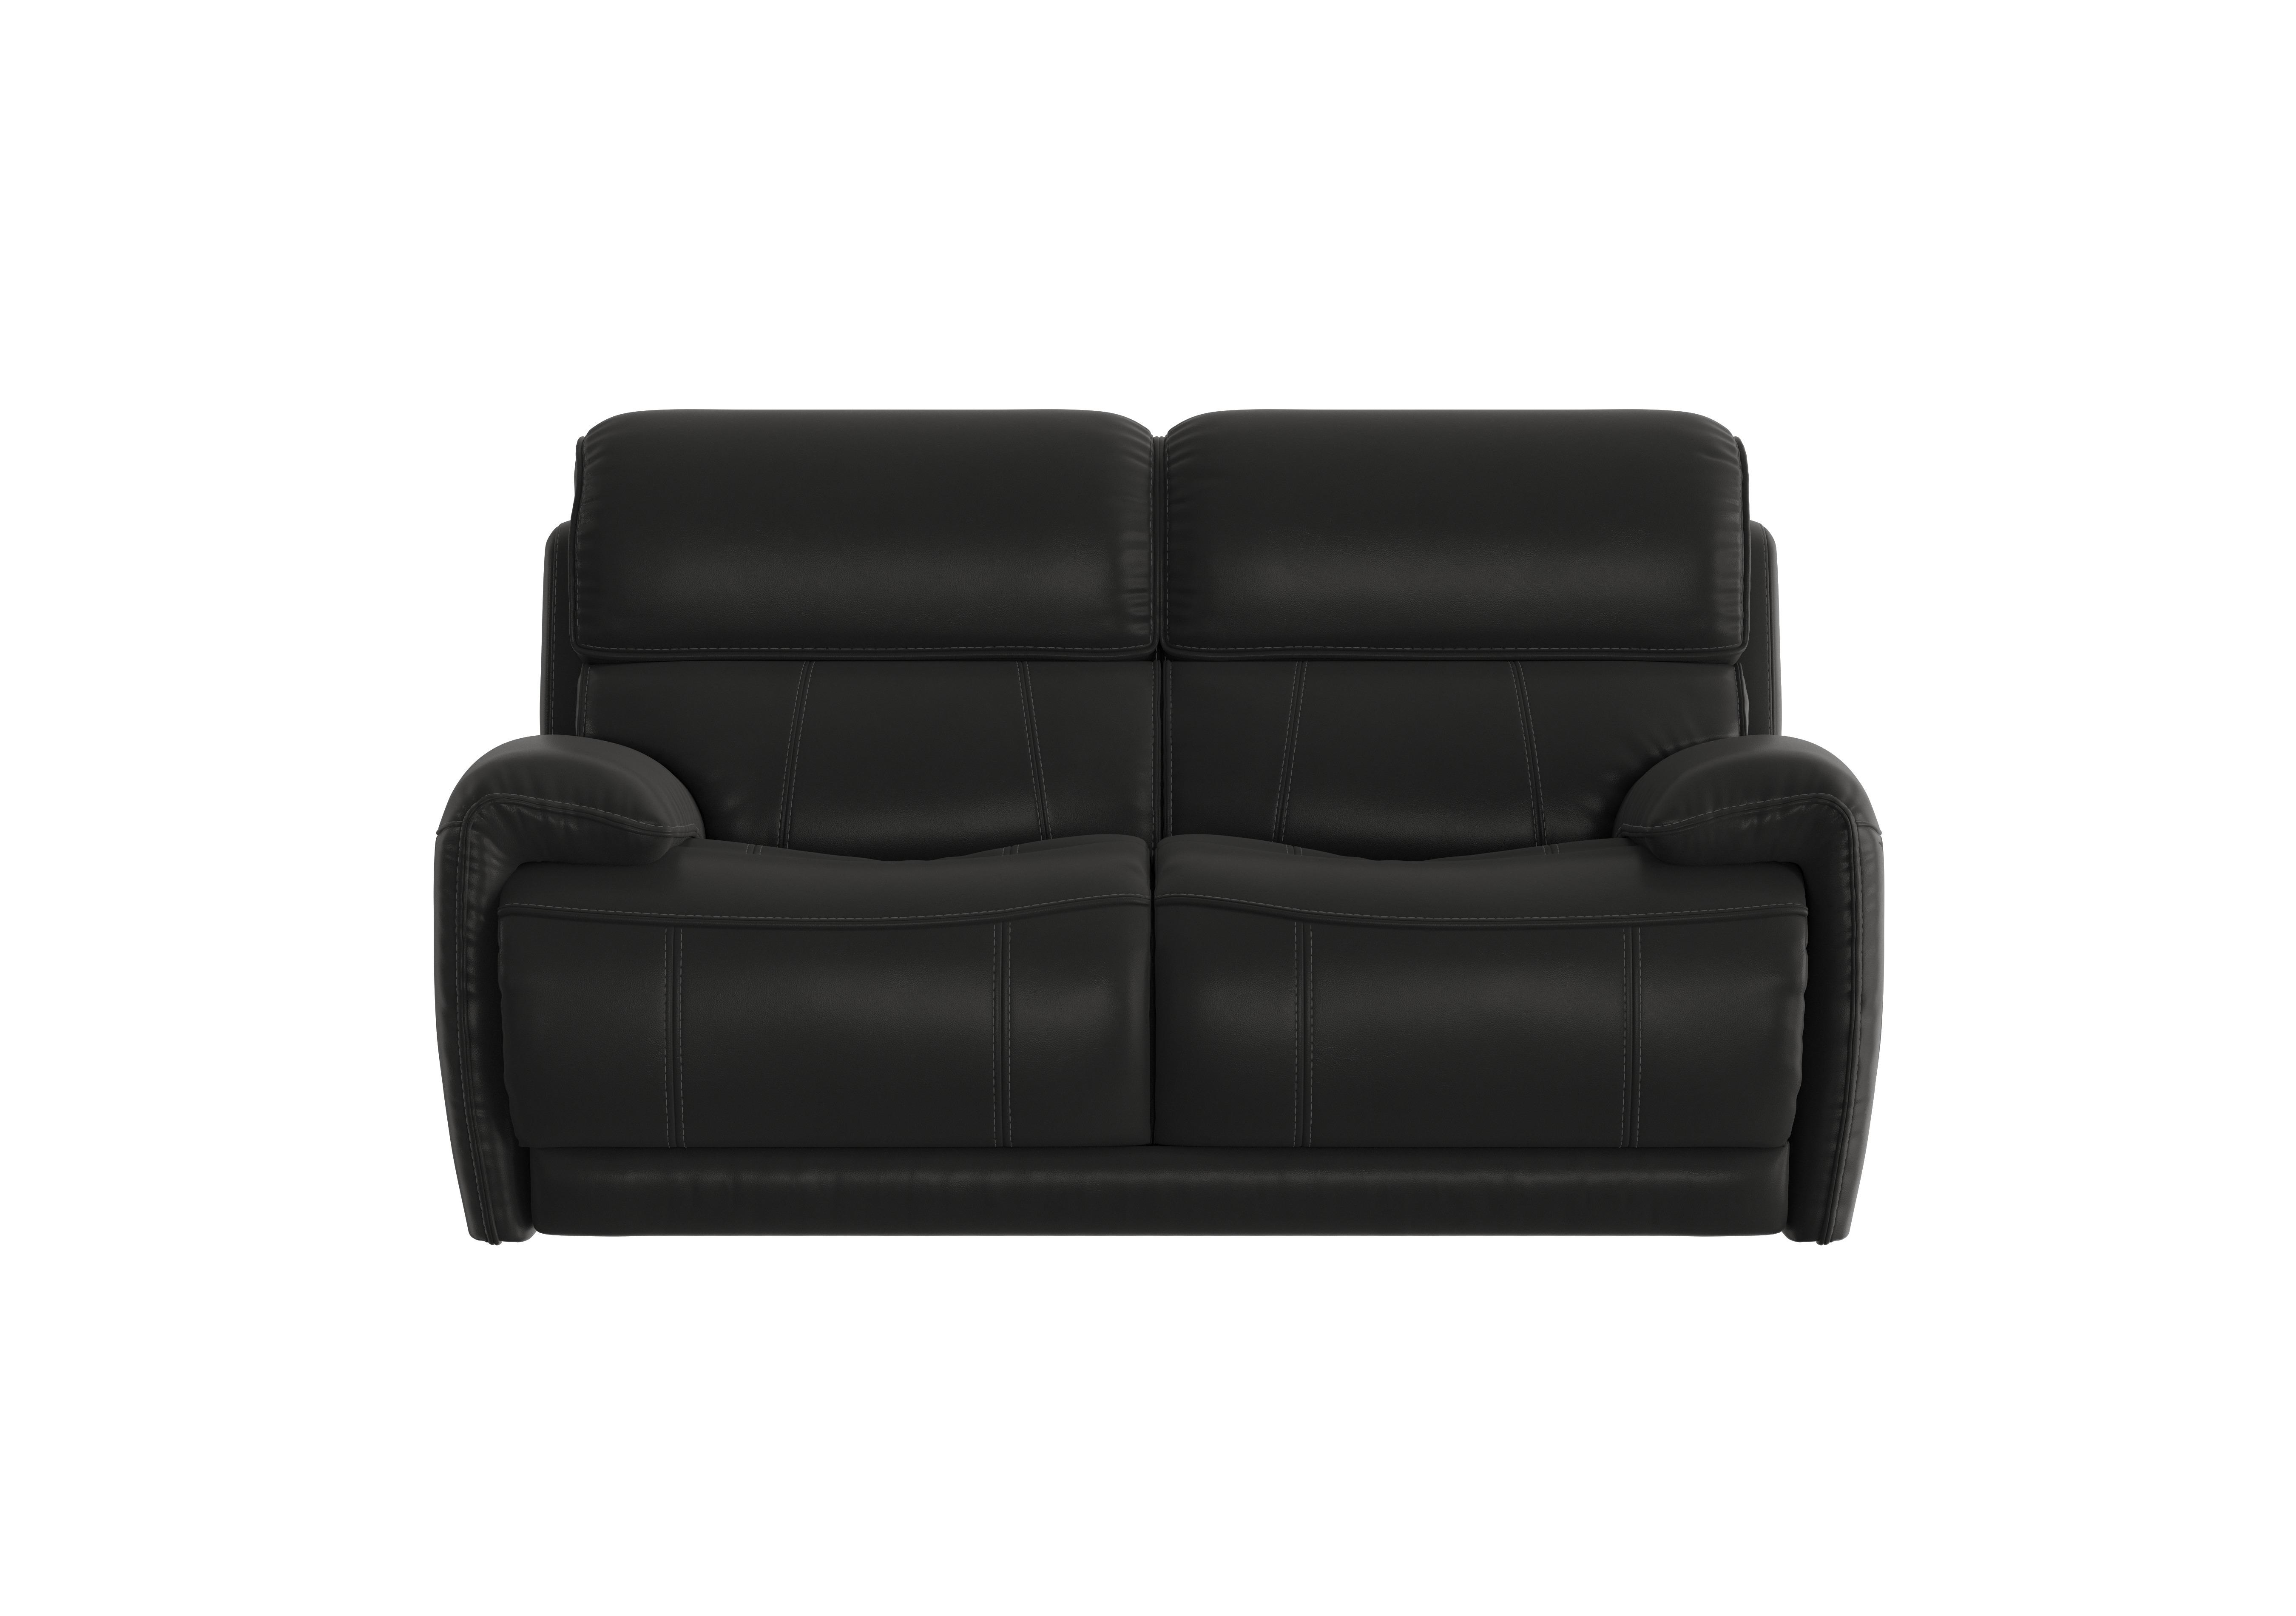 Link 2 Seater Leather Sofa in Bv-3500 Classic Black on Furniture Village